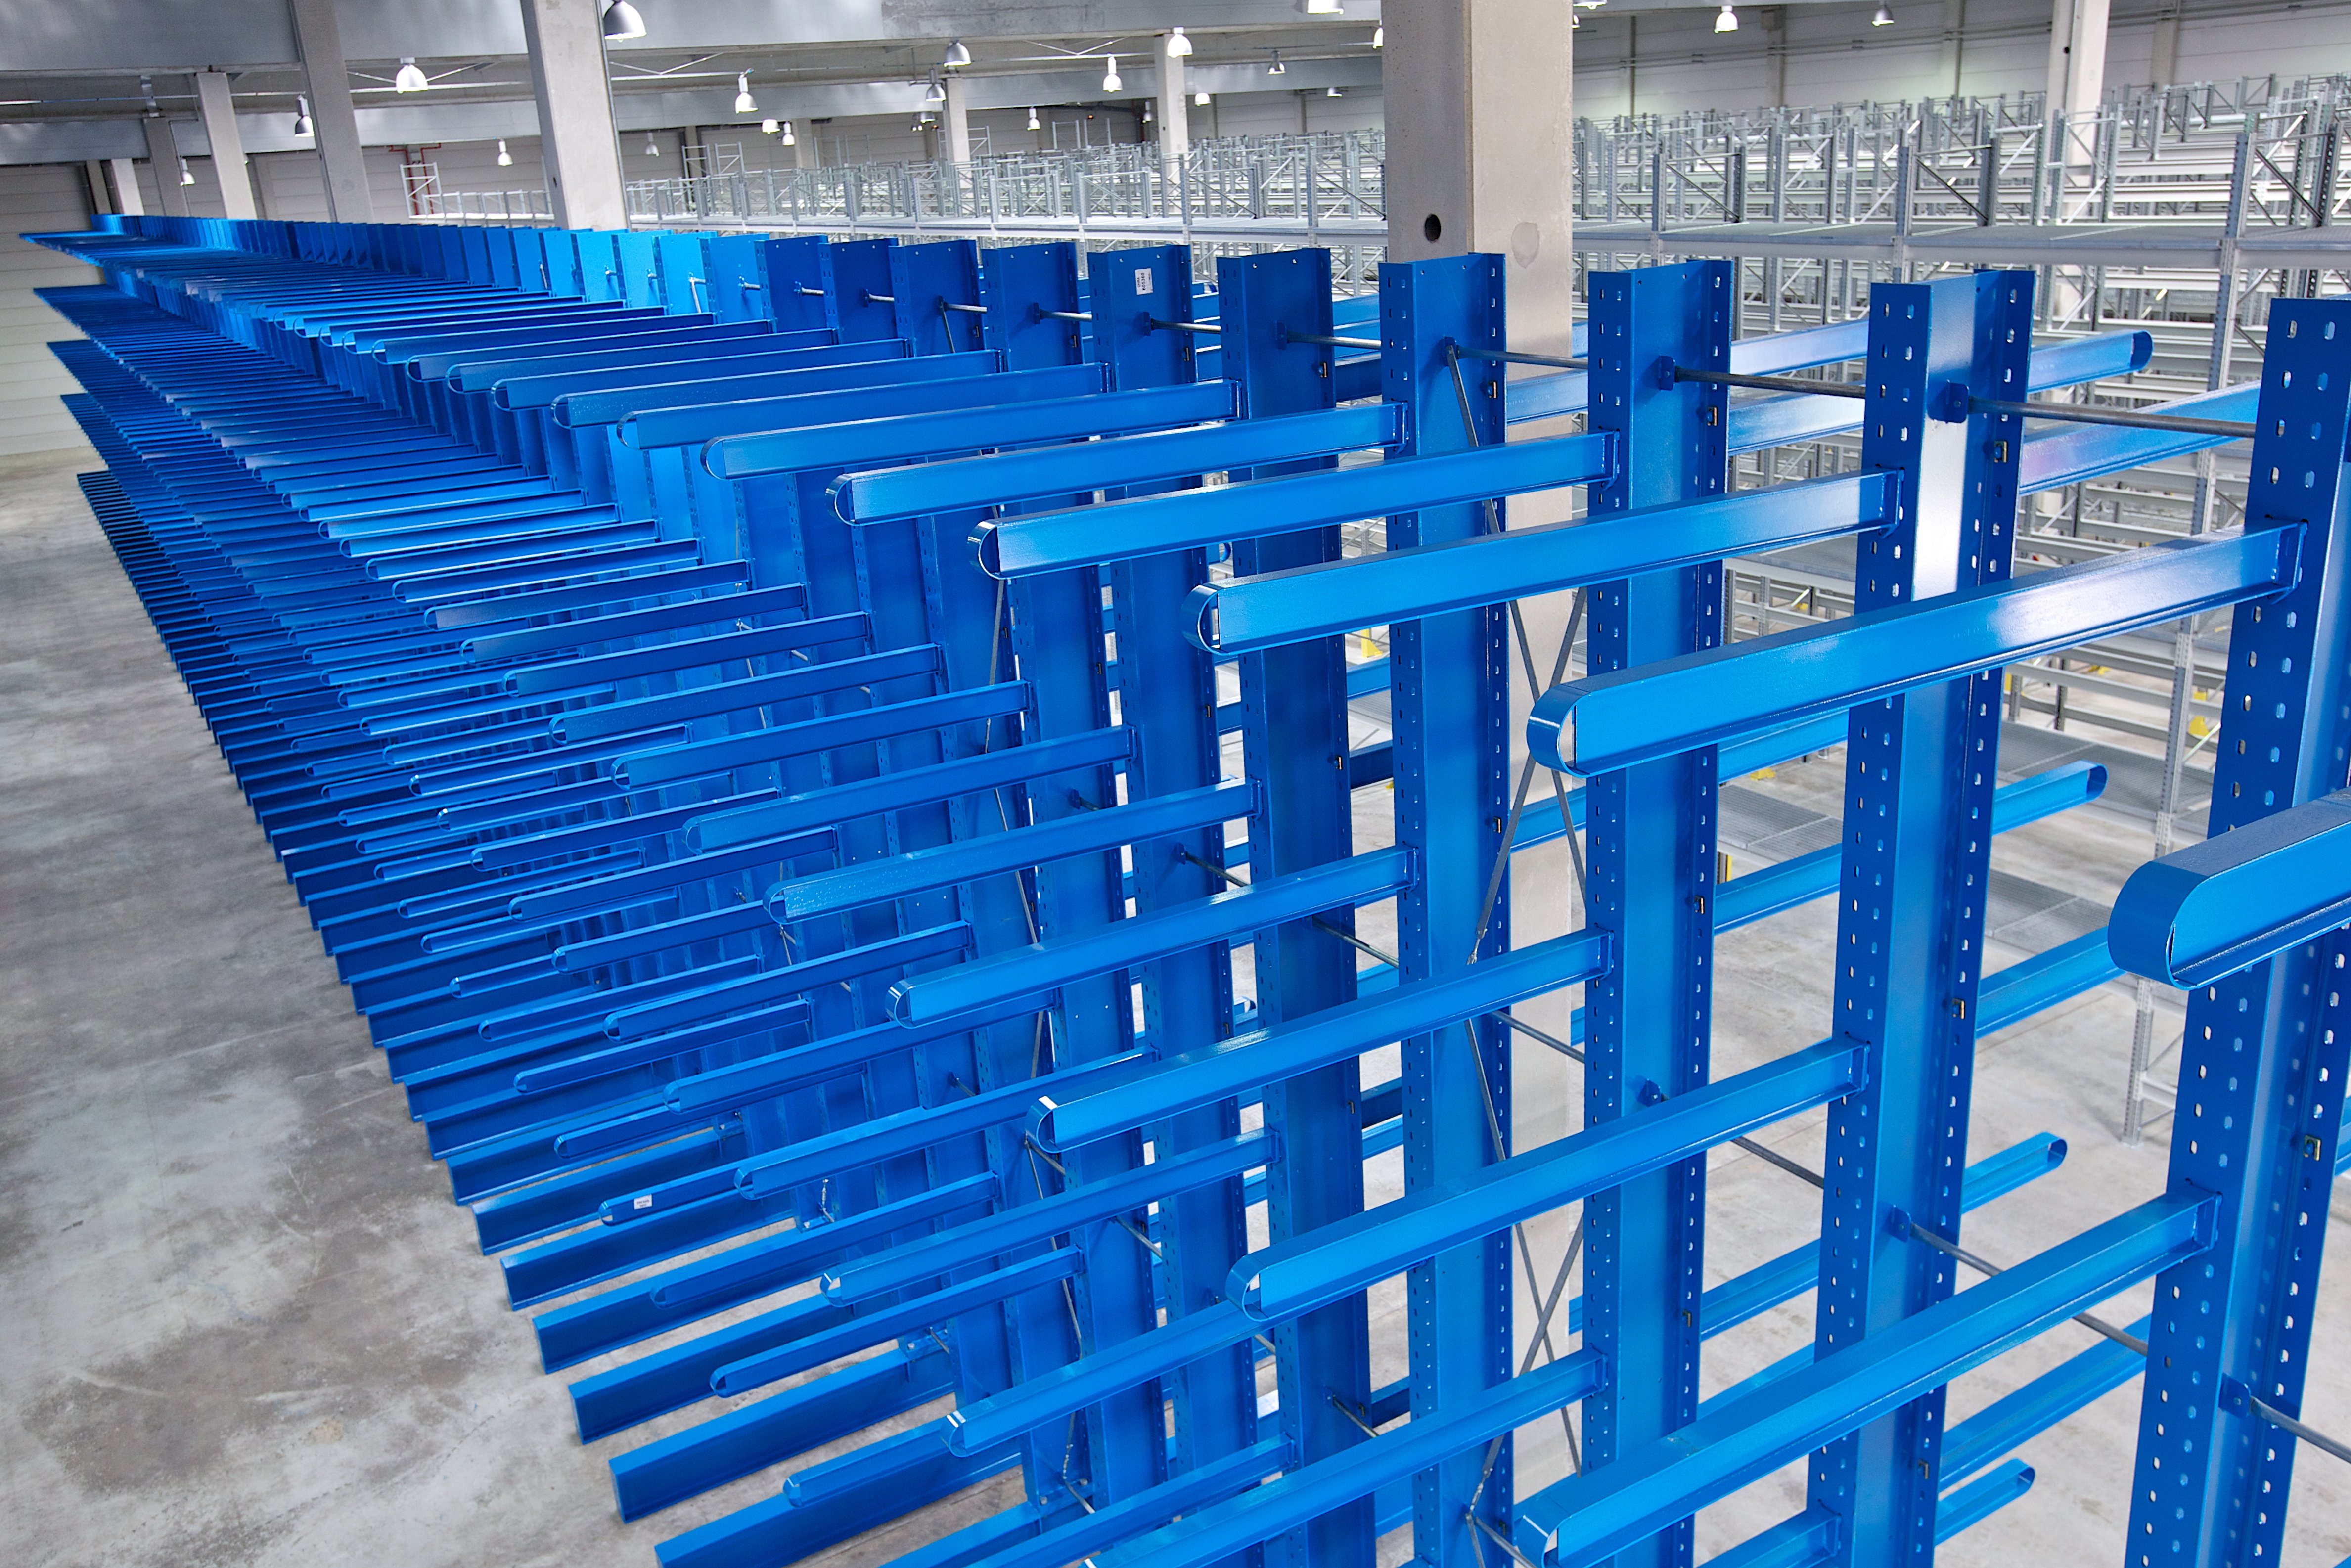 [Translate "Hungary"] Cantilever racking system by OHRA